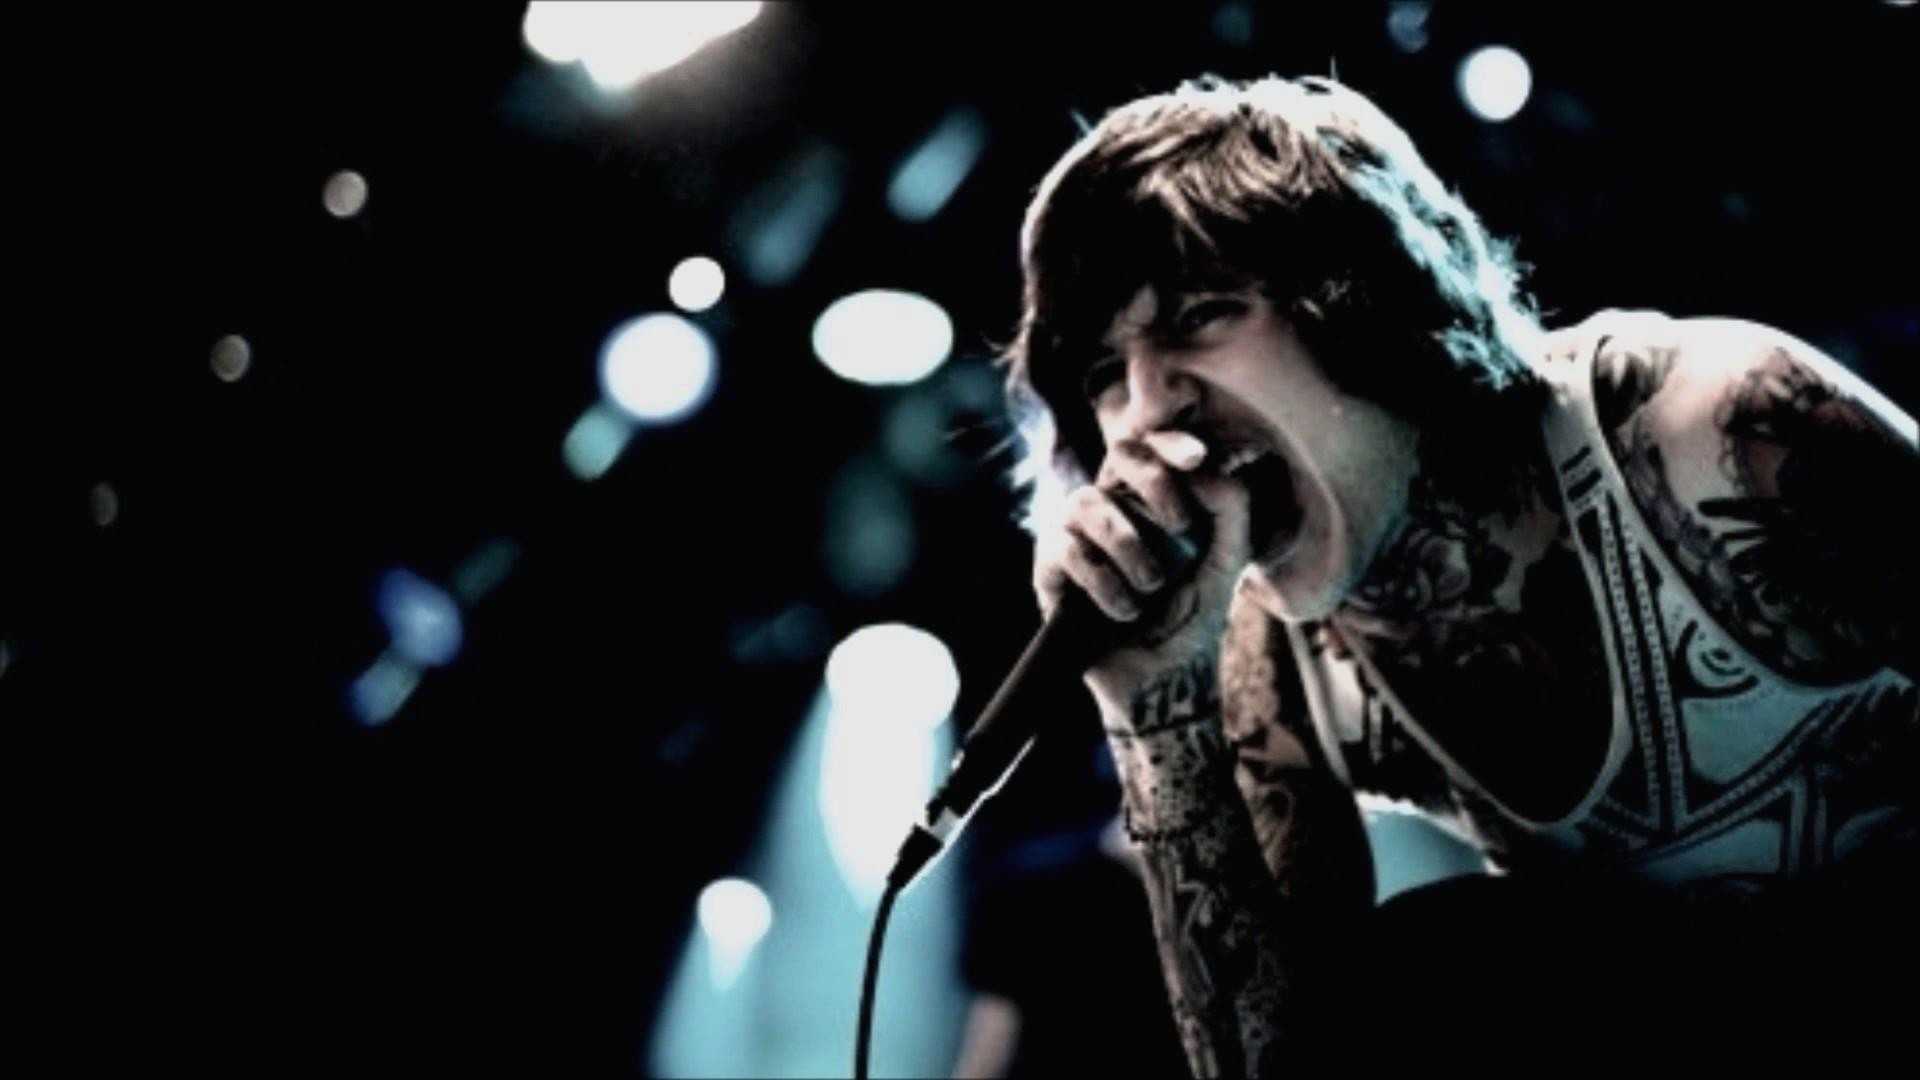 Bring Me The Horizon Wallpaper Full HD Pics For iPhone Undefined